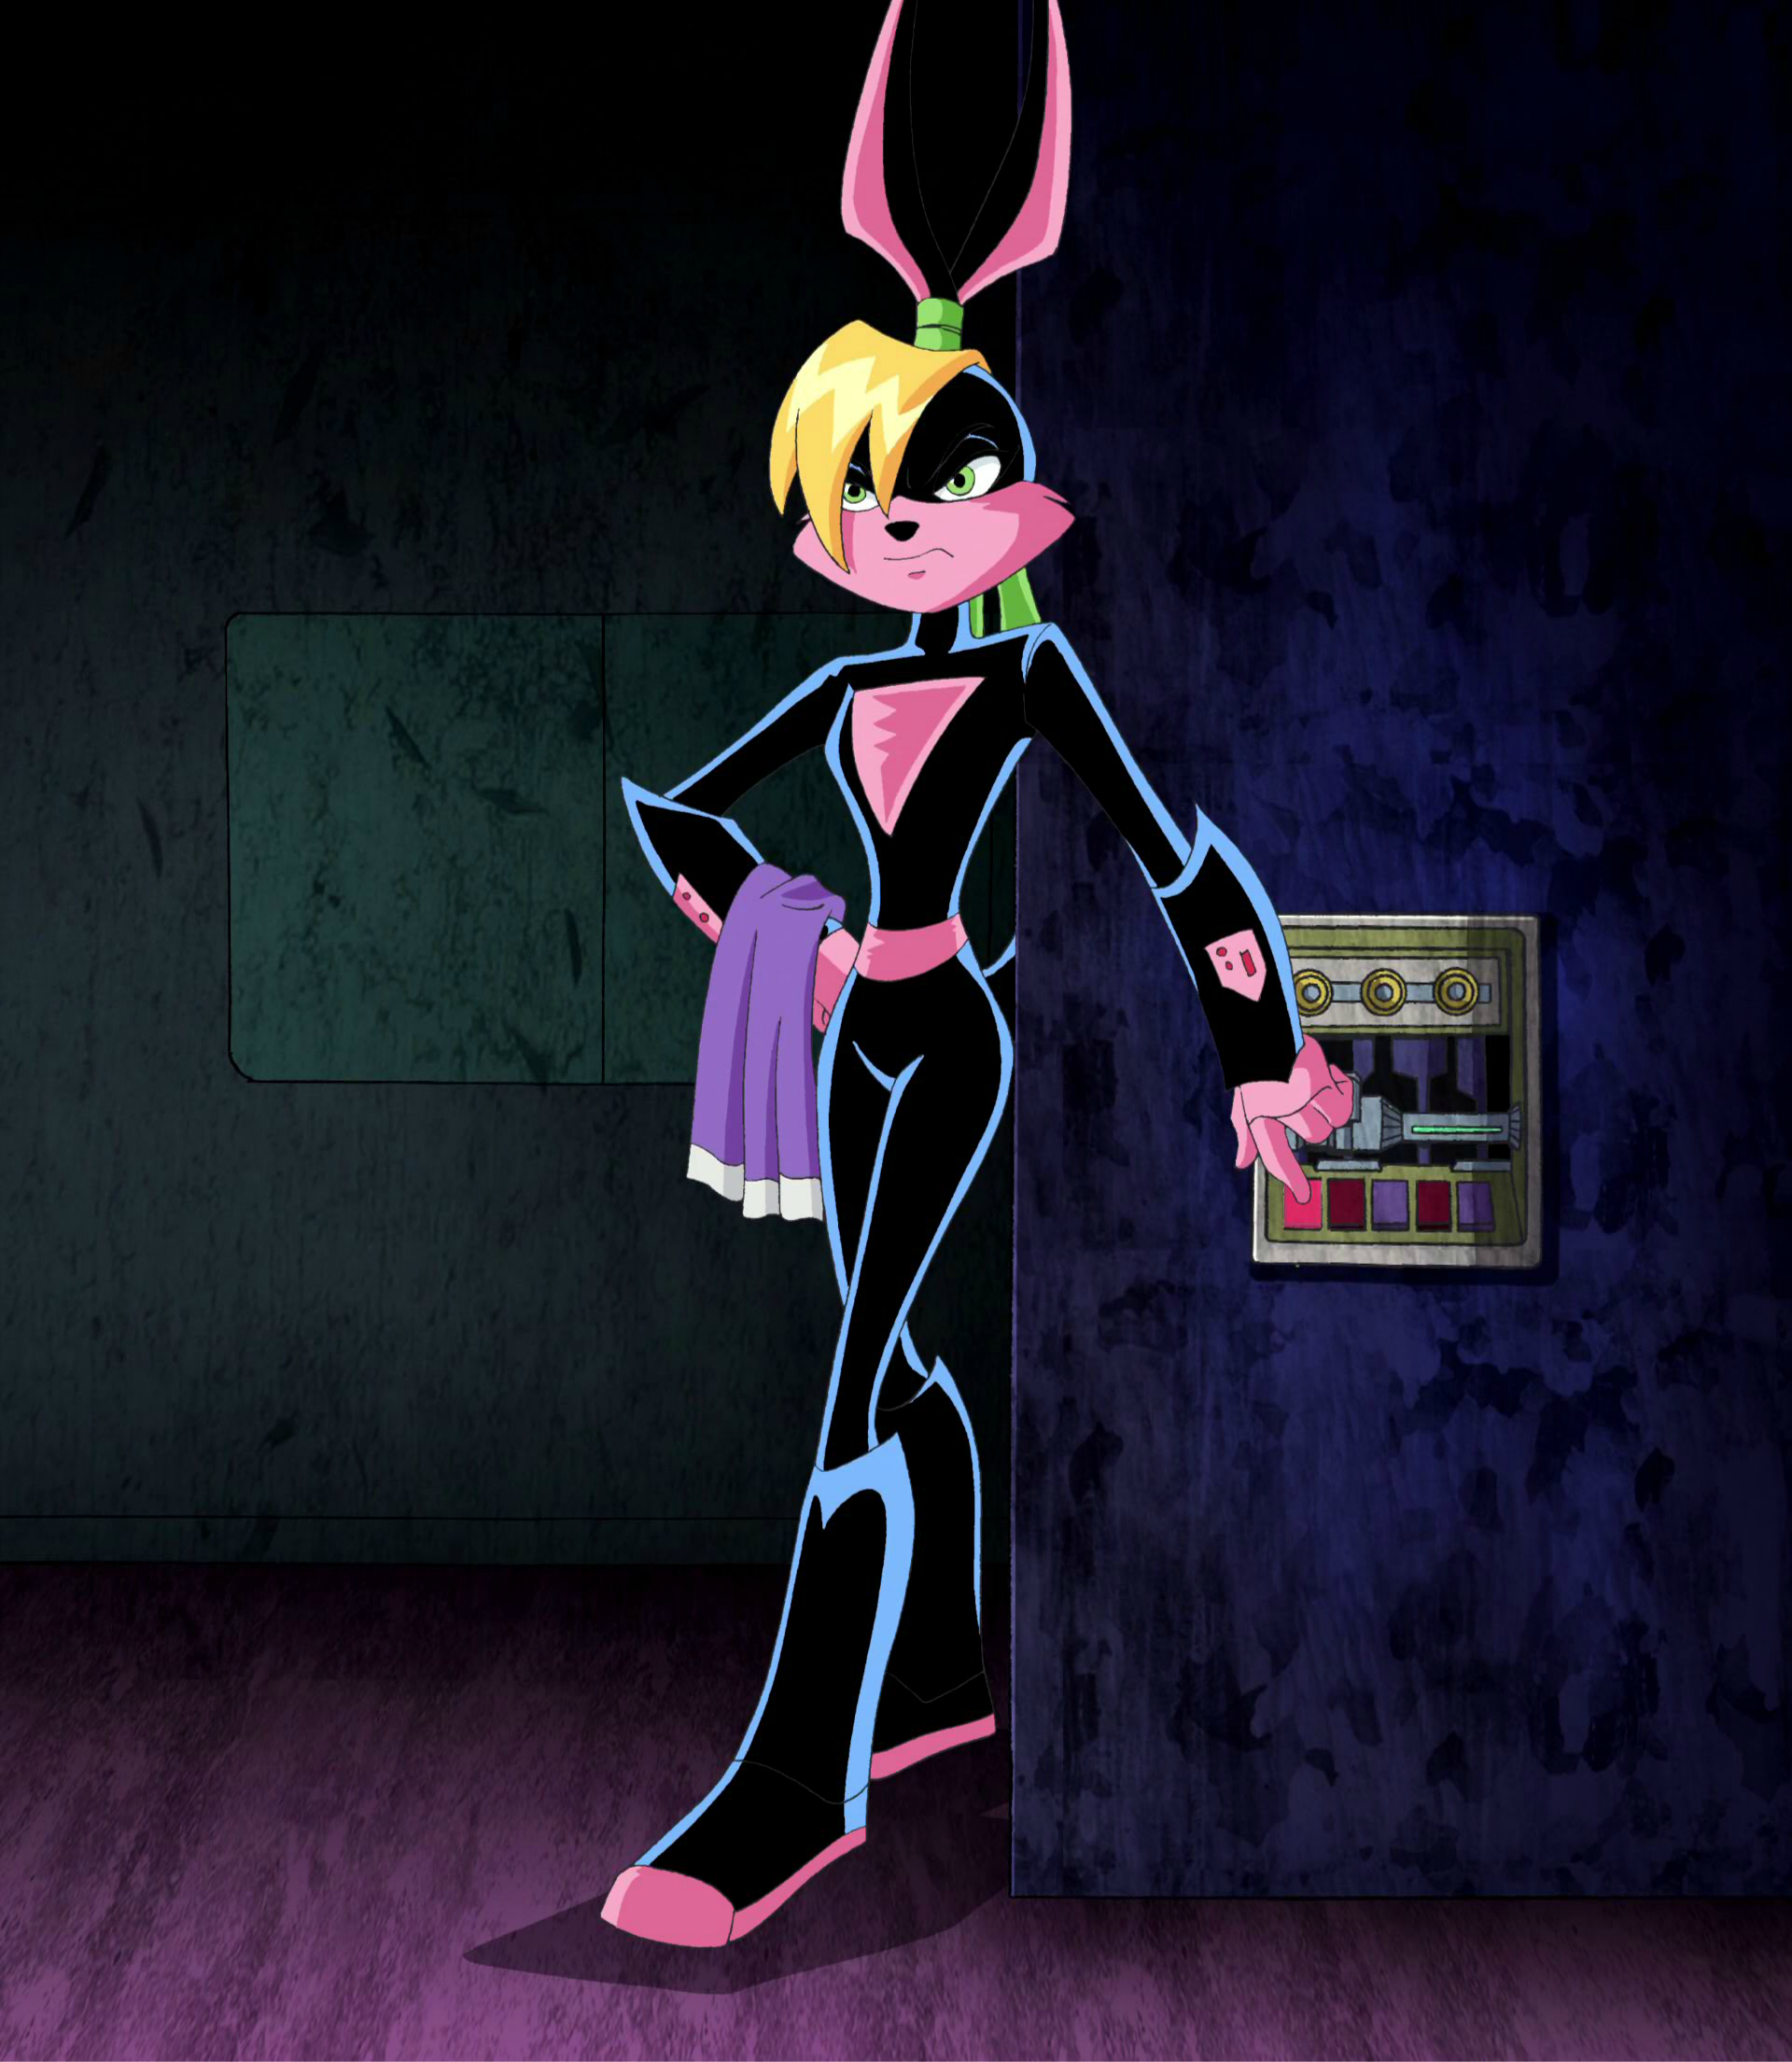 Loonatics unleashed danger duck and lexi bunny’s backstory.